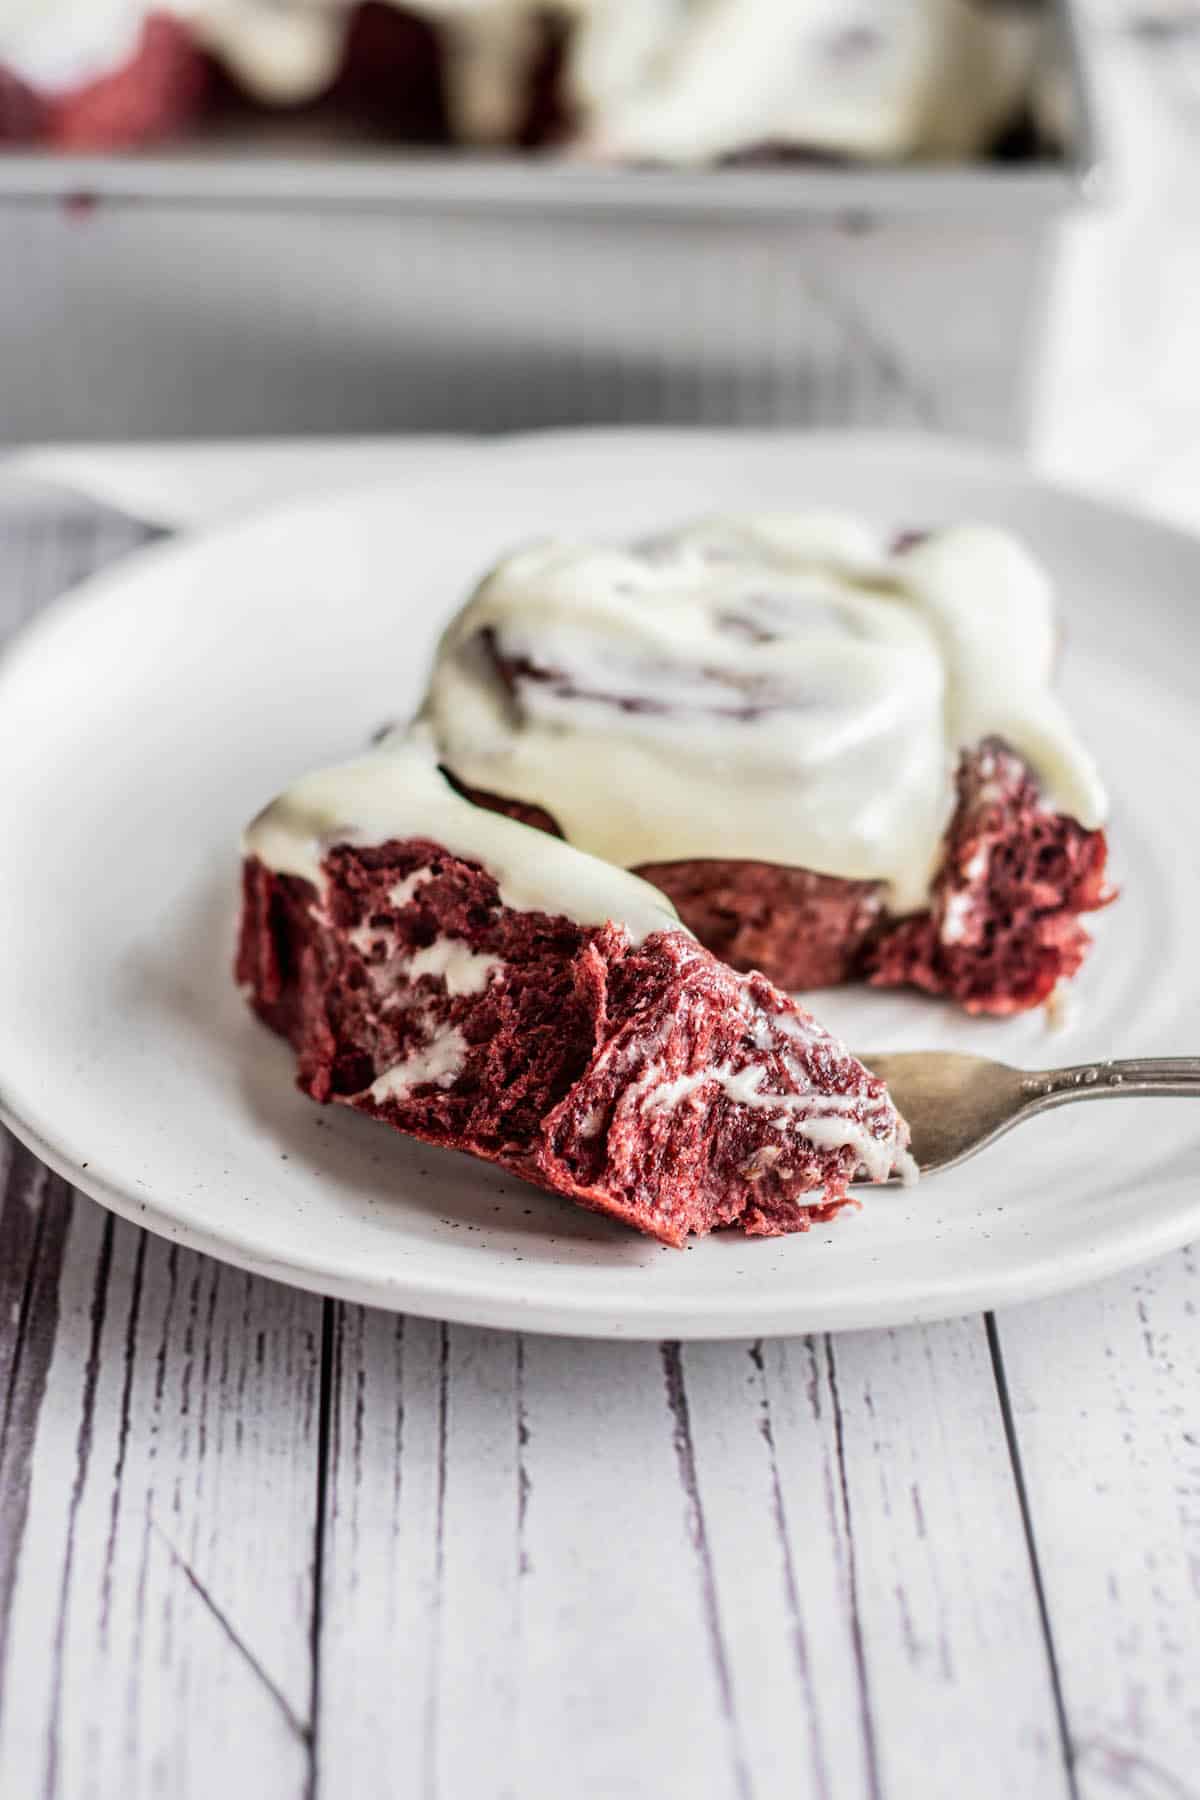 A red velvet cinnamon rolls with cream cheese icing on a plate.